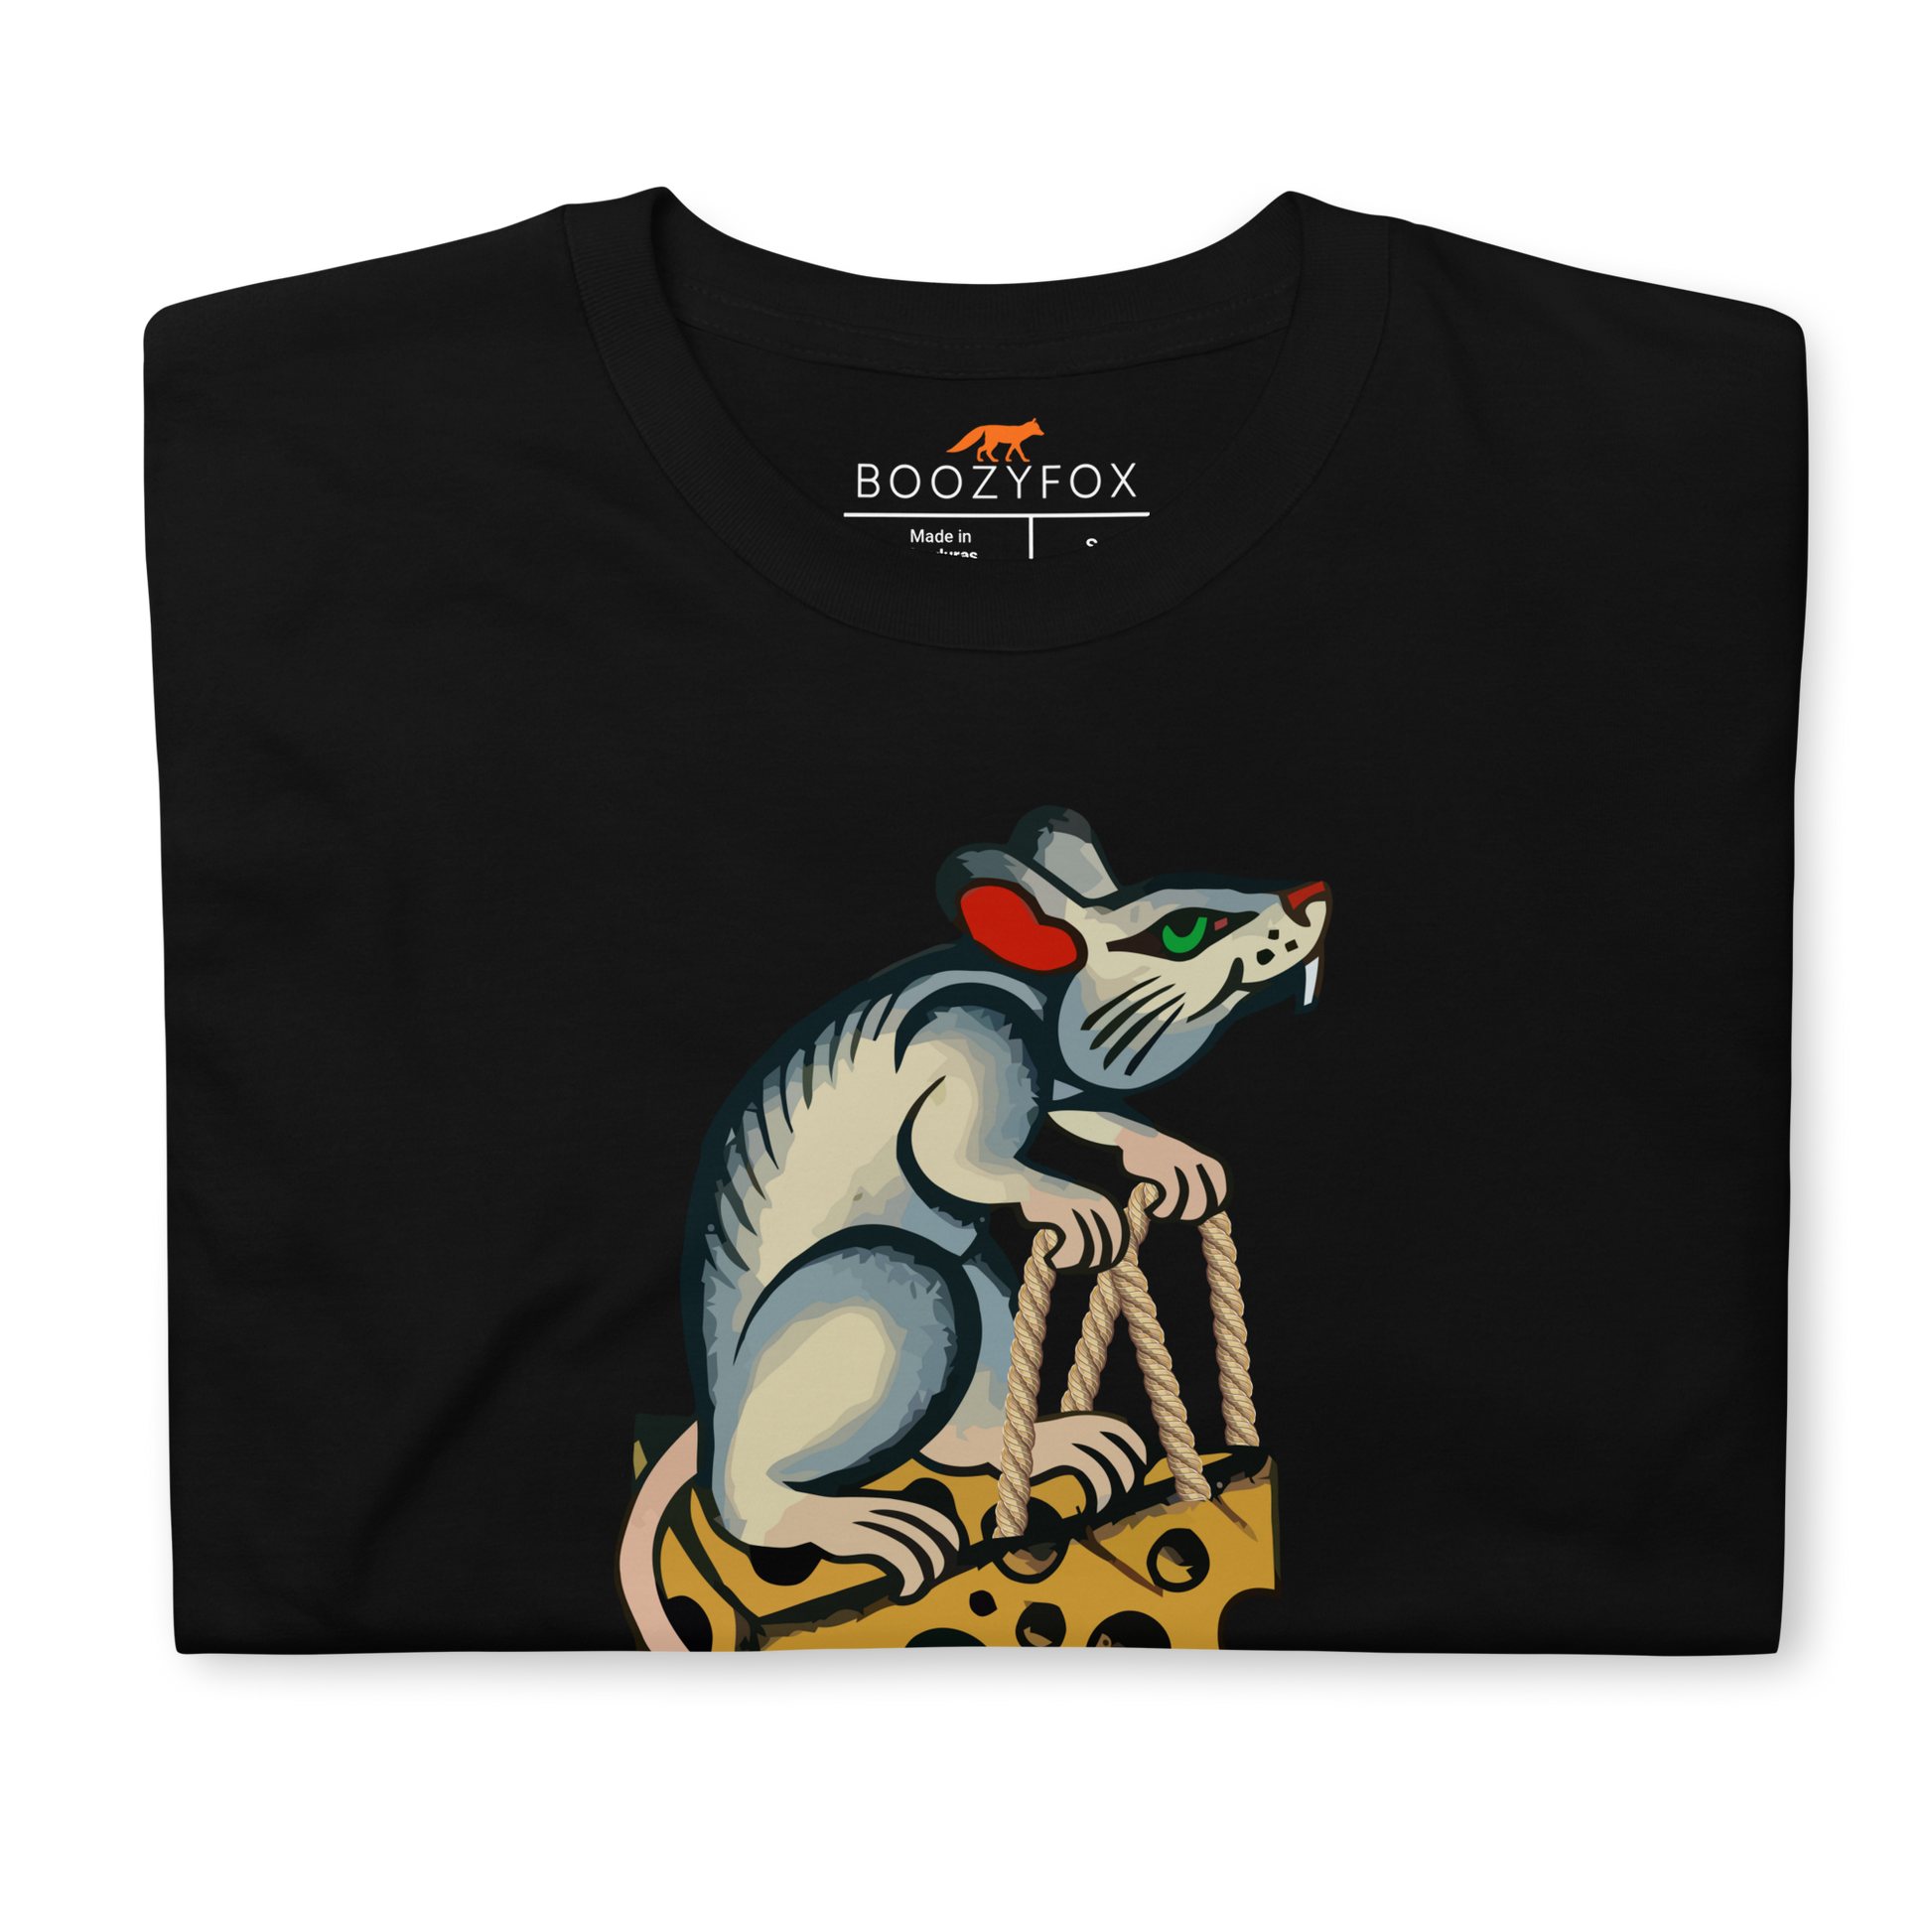 Front details of a Black Rat T-Shirt featuring a hilarious Cheese The Day graphic on the chest - Funny Graphic Rat T-Shirts - Boozy Fox